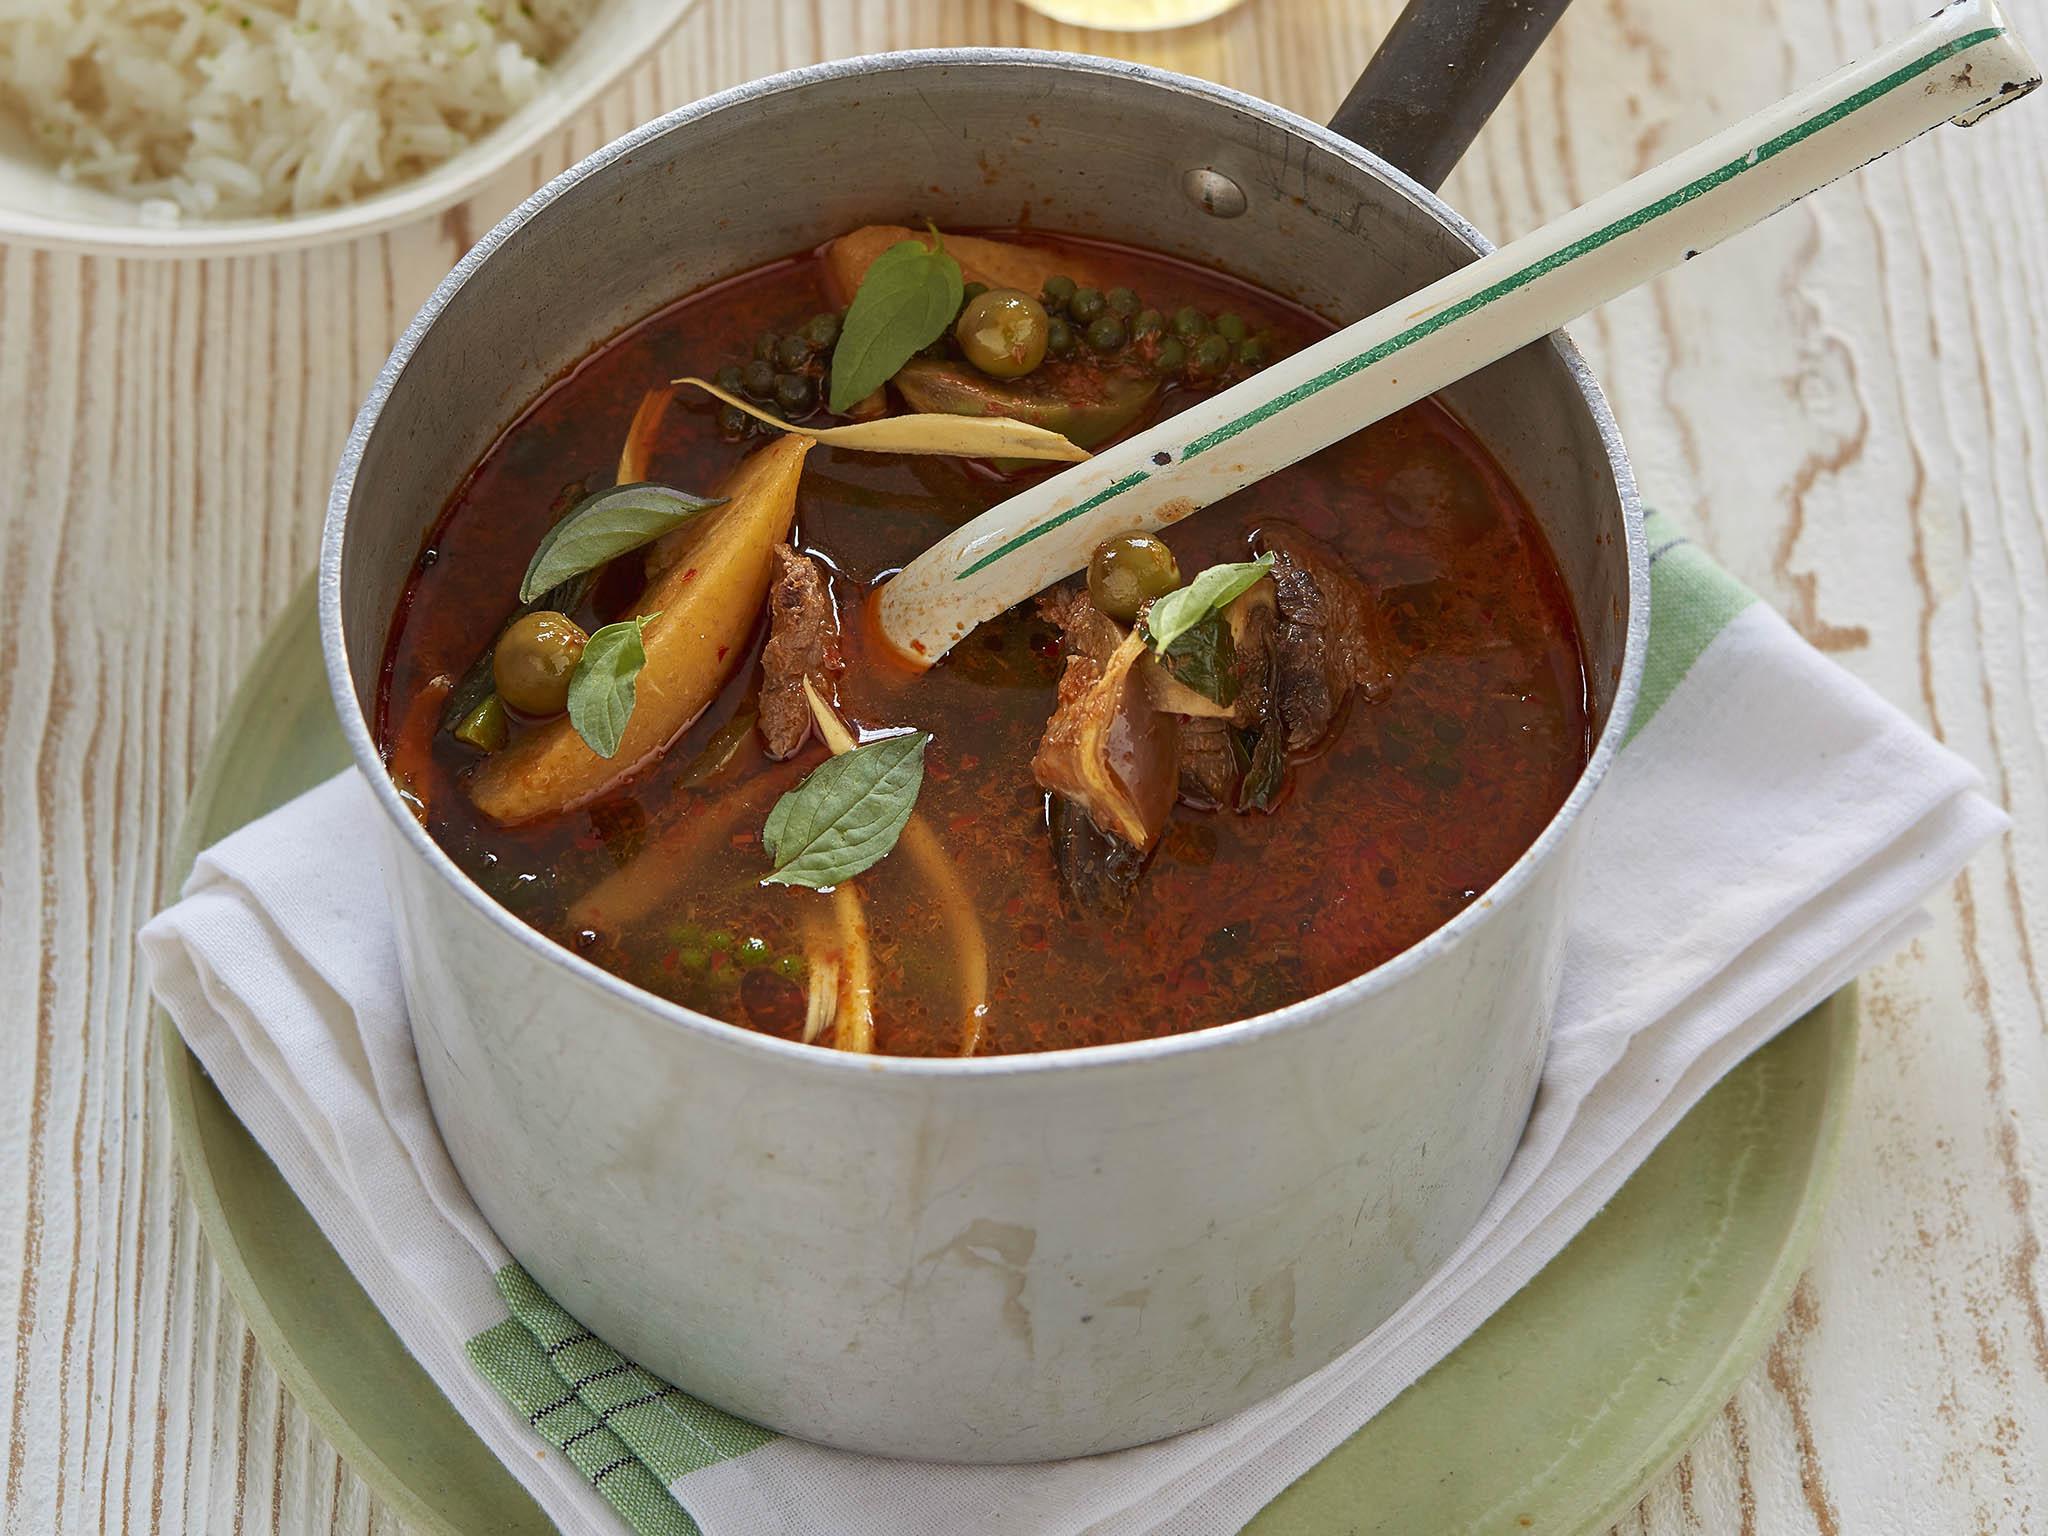 Kaeng pa, otherwise known as jungle curry, is from the forested areas of Thailand